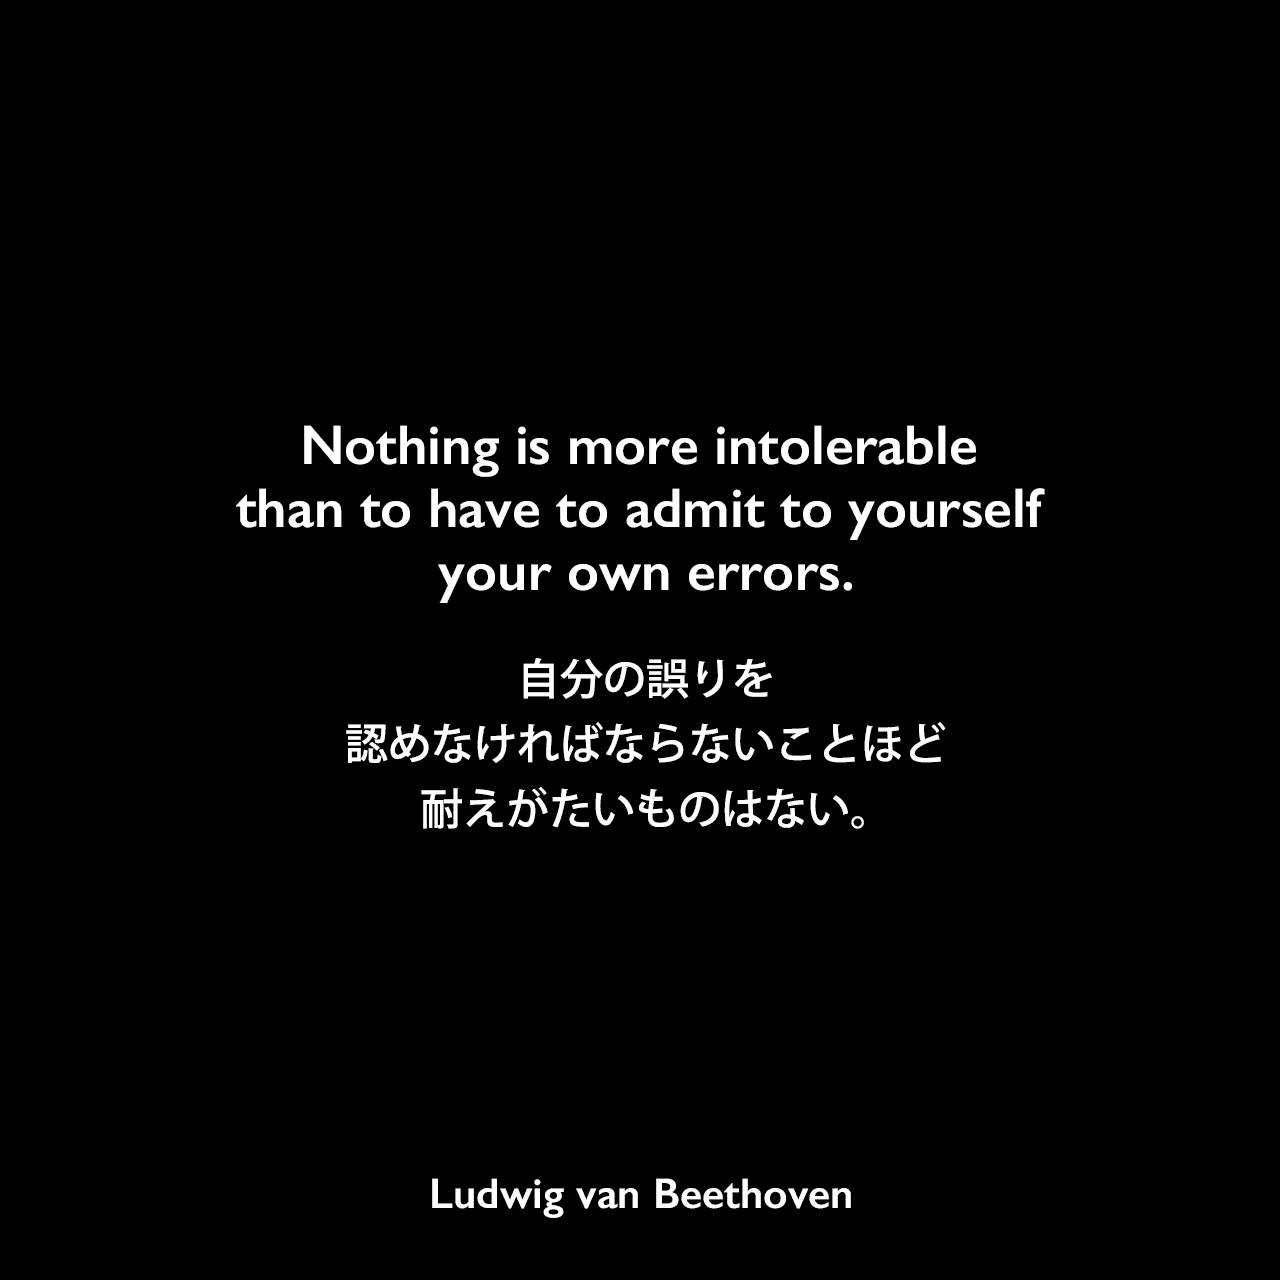 Nothing is more intolerable than to have to admit to yourself your own errors.自分の誤りを認めなければならないことほど耐えがたいものはない。Ludwig van Beethoven